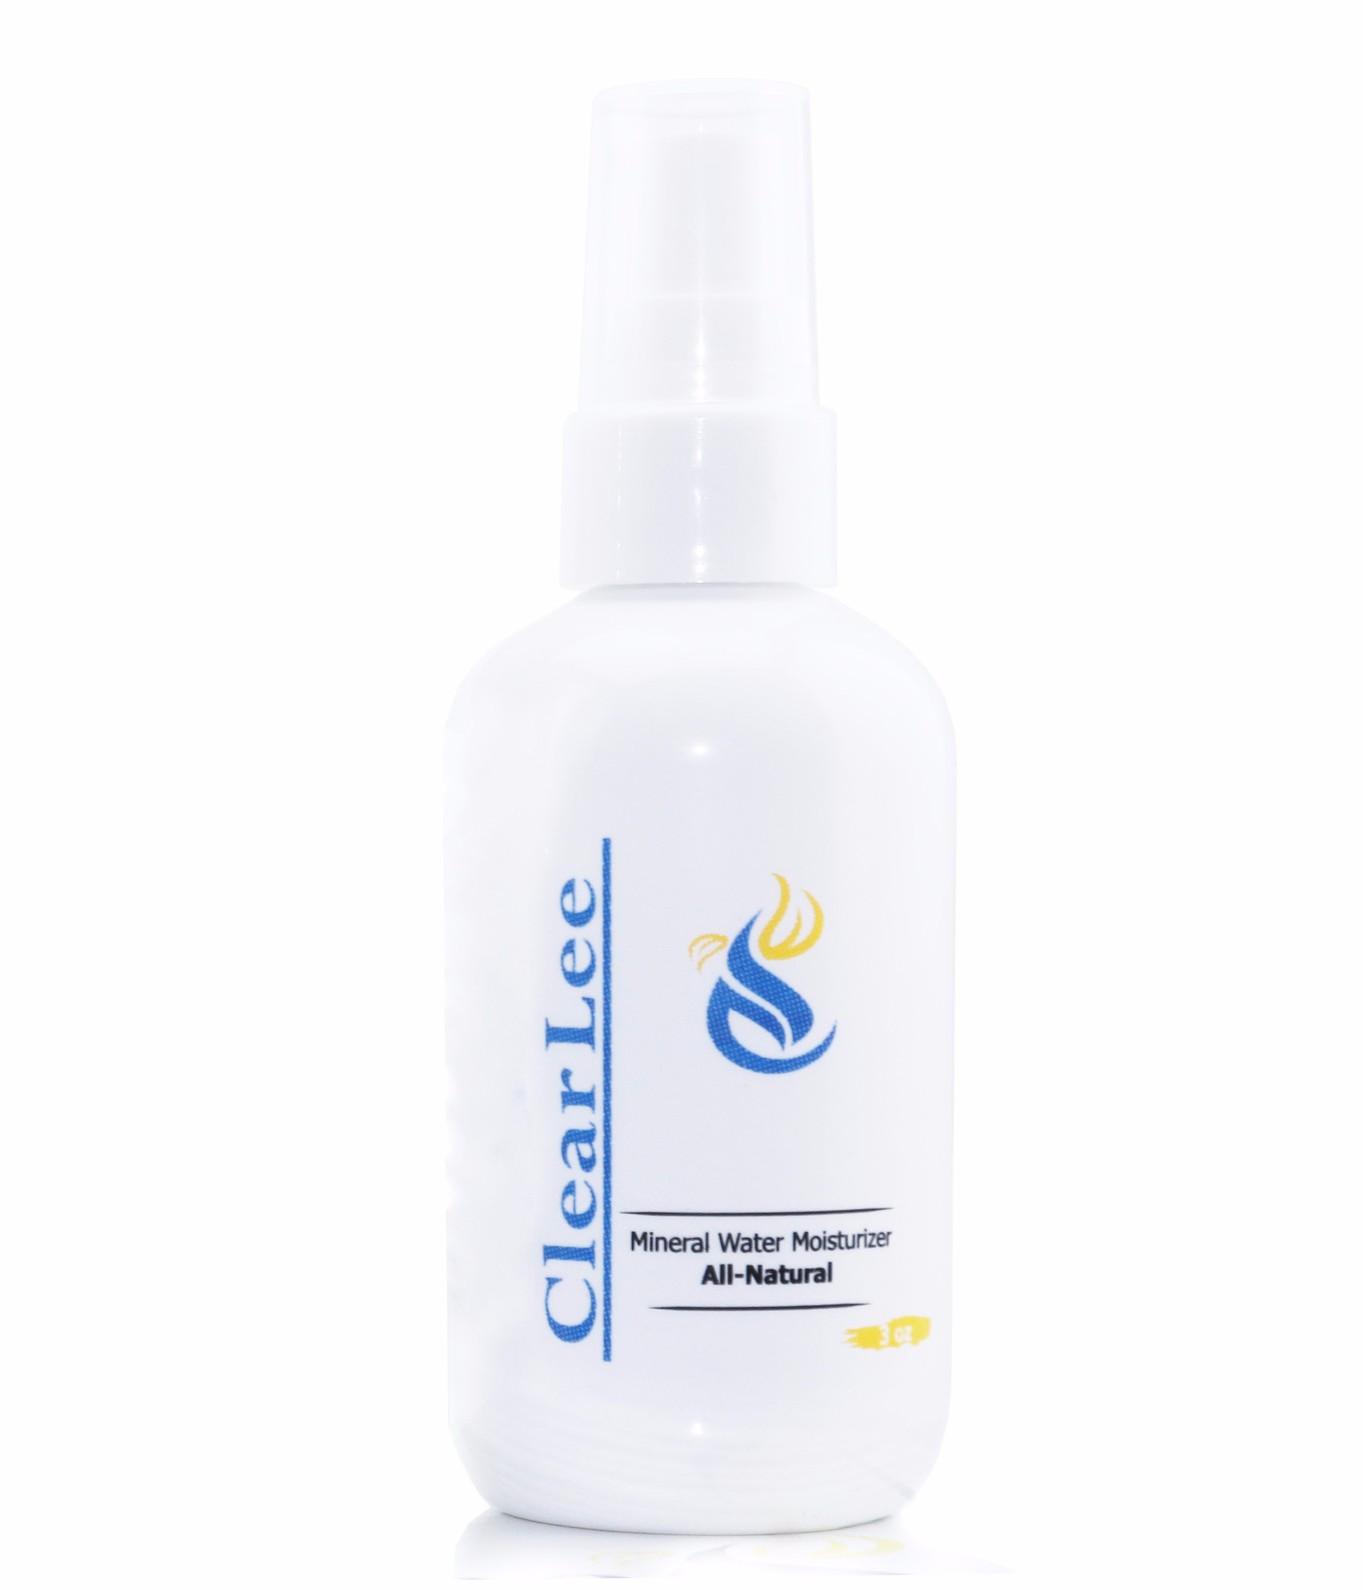 ClearLee Water Mineral Moisturizer